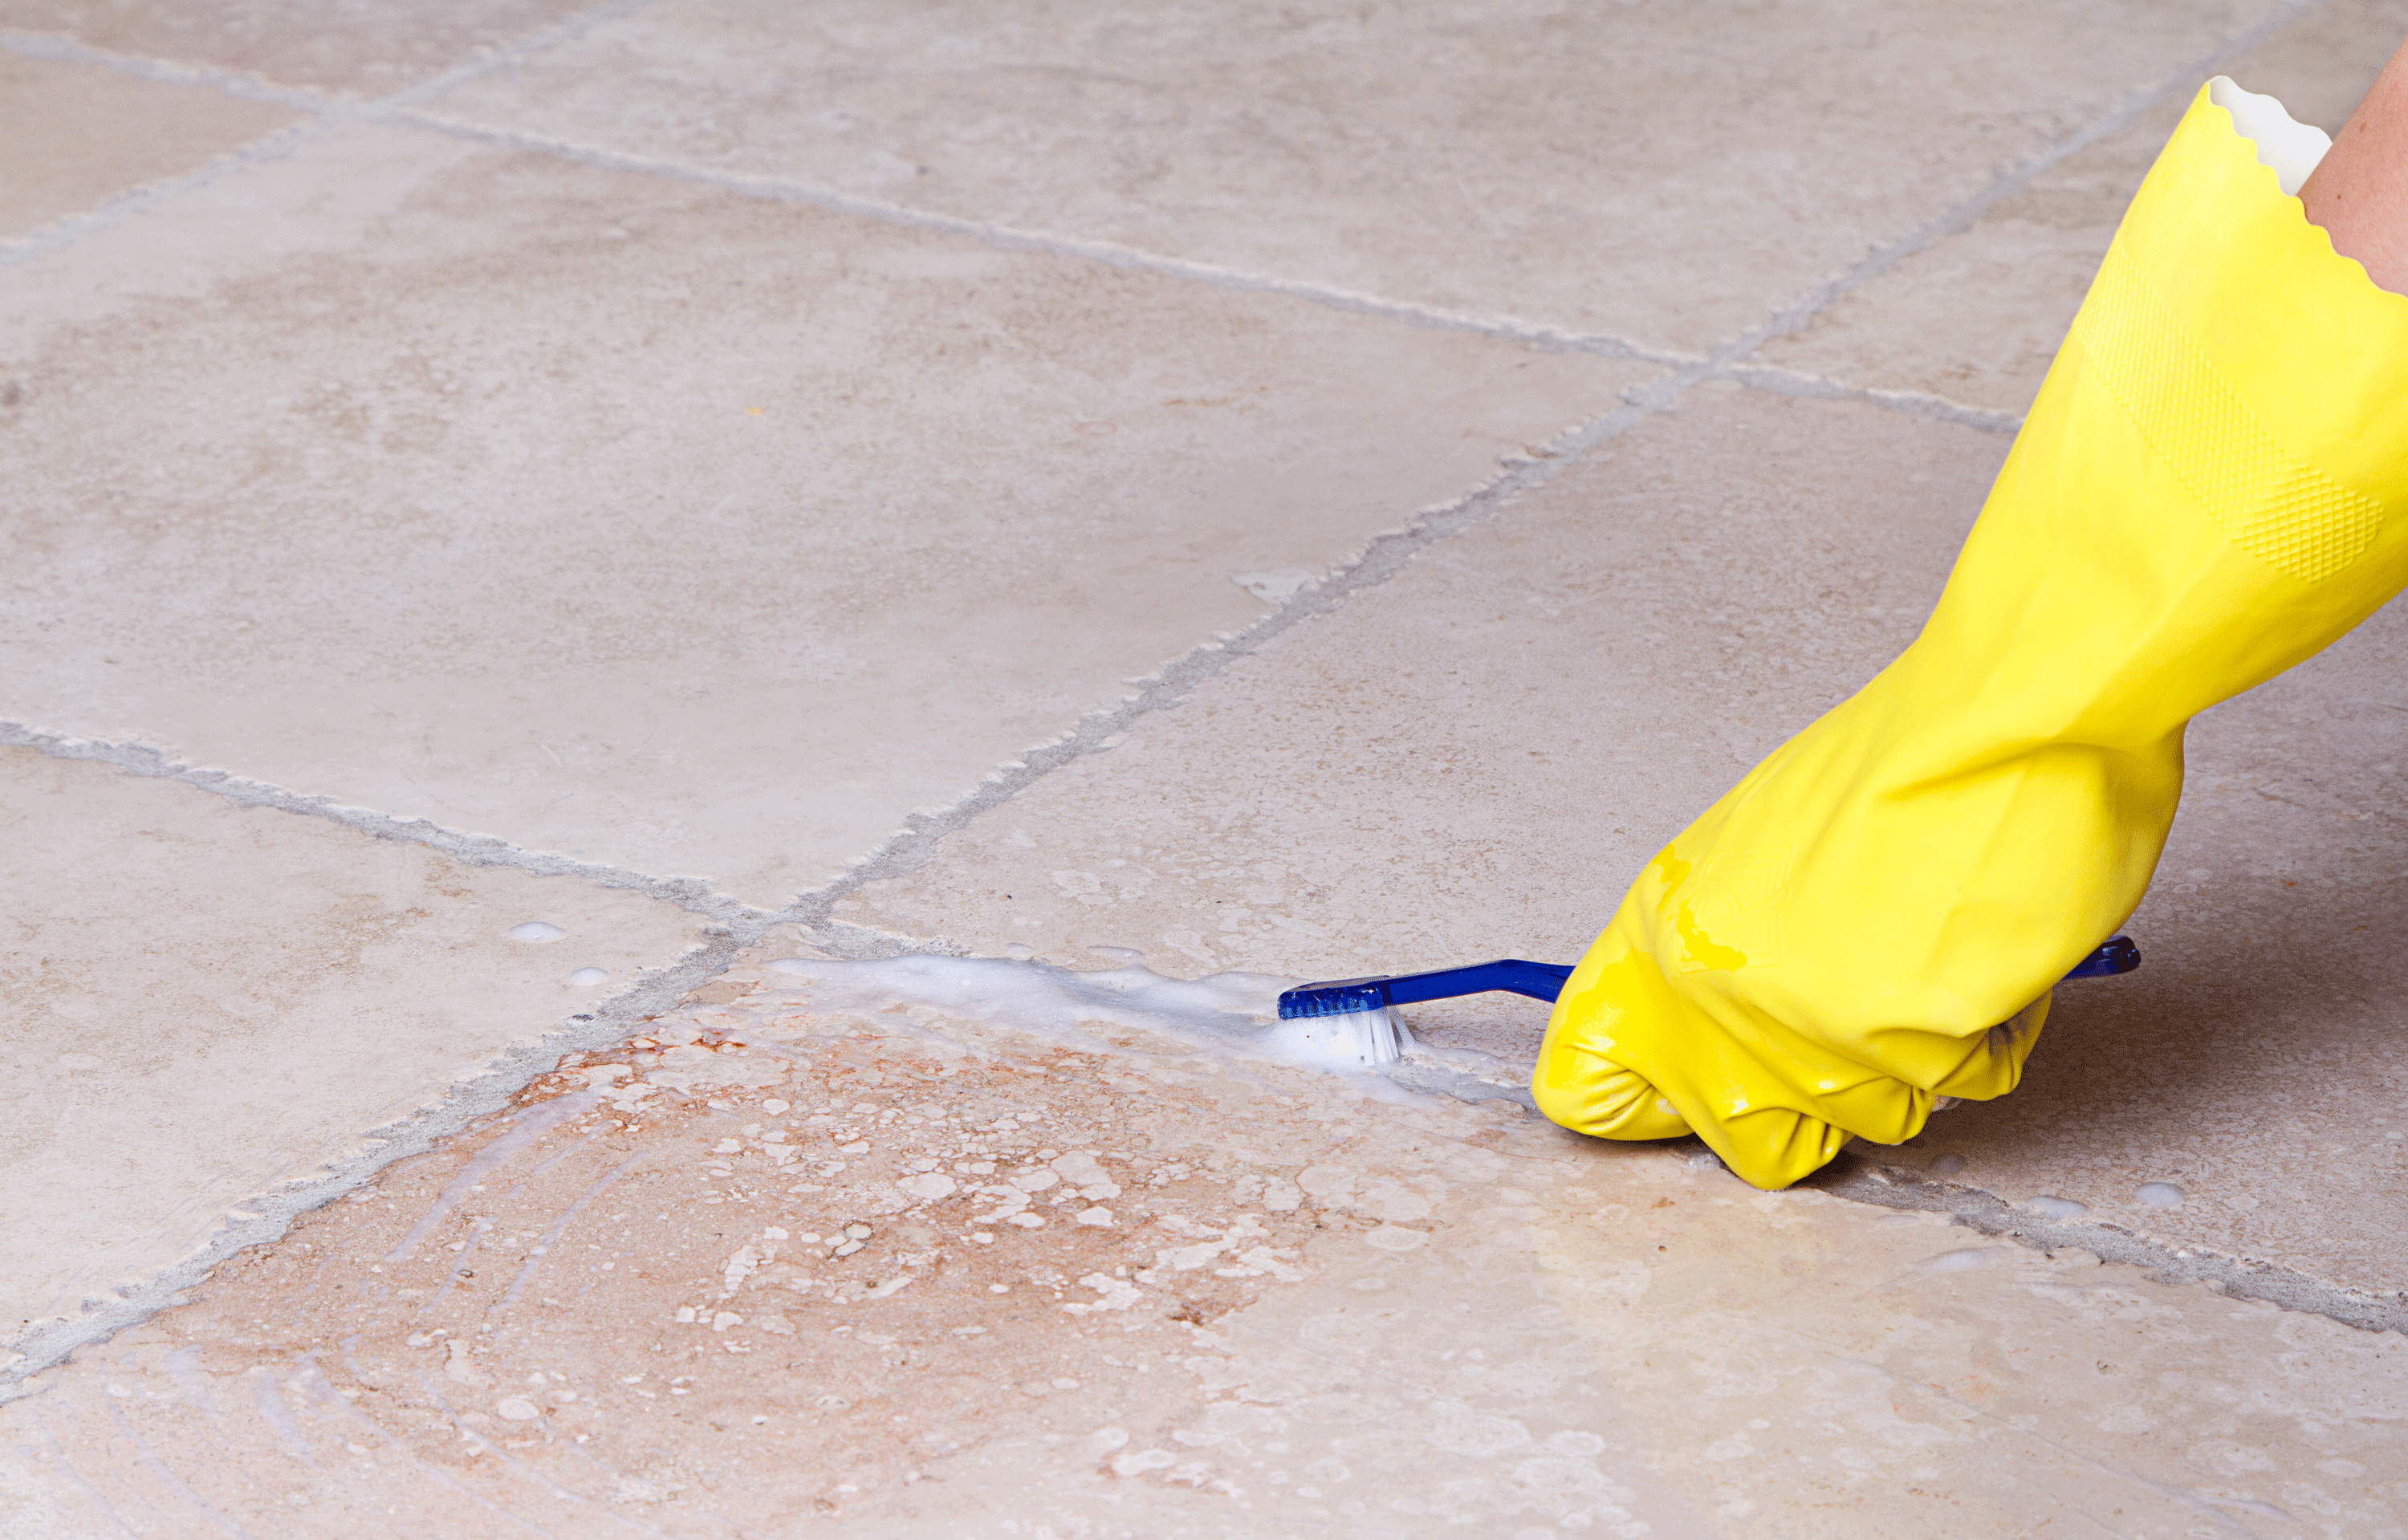 s-how-to-clean-grout-on-tile-floors-white-how-to-clean-grout-on-tile-floors-vinegar-how-to-clean-grout-on-tile-floors-with-steam-how-to-clean-grout-on-tile-floors-white-how-to-clean-grout-on-tile